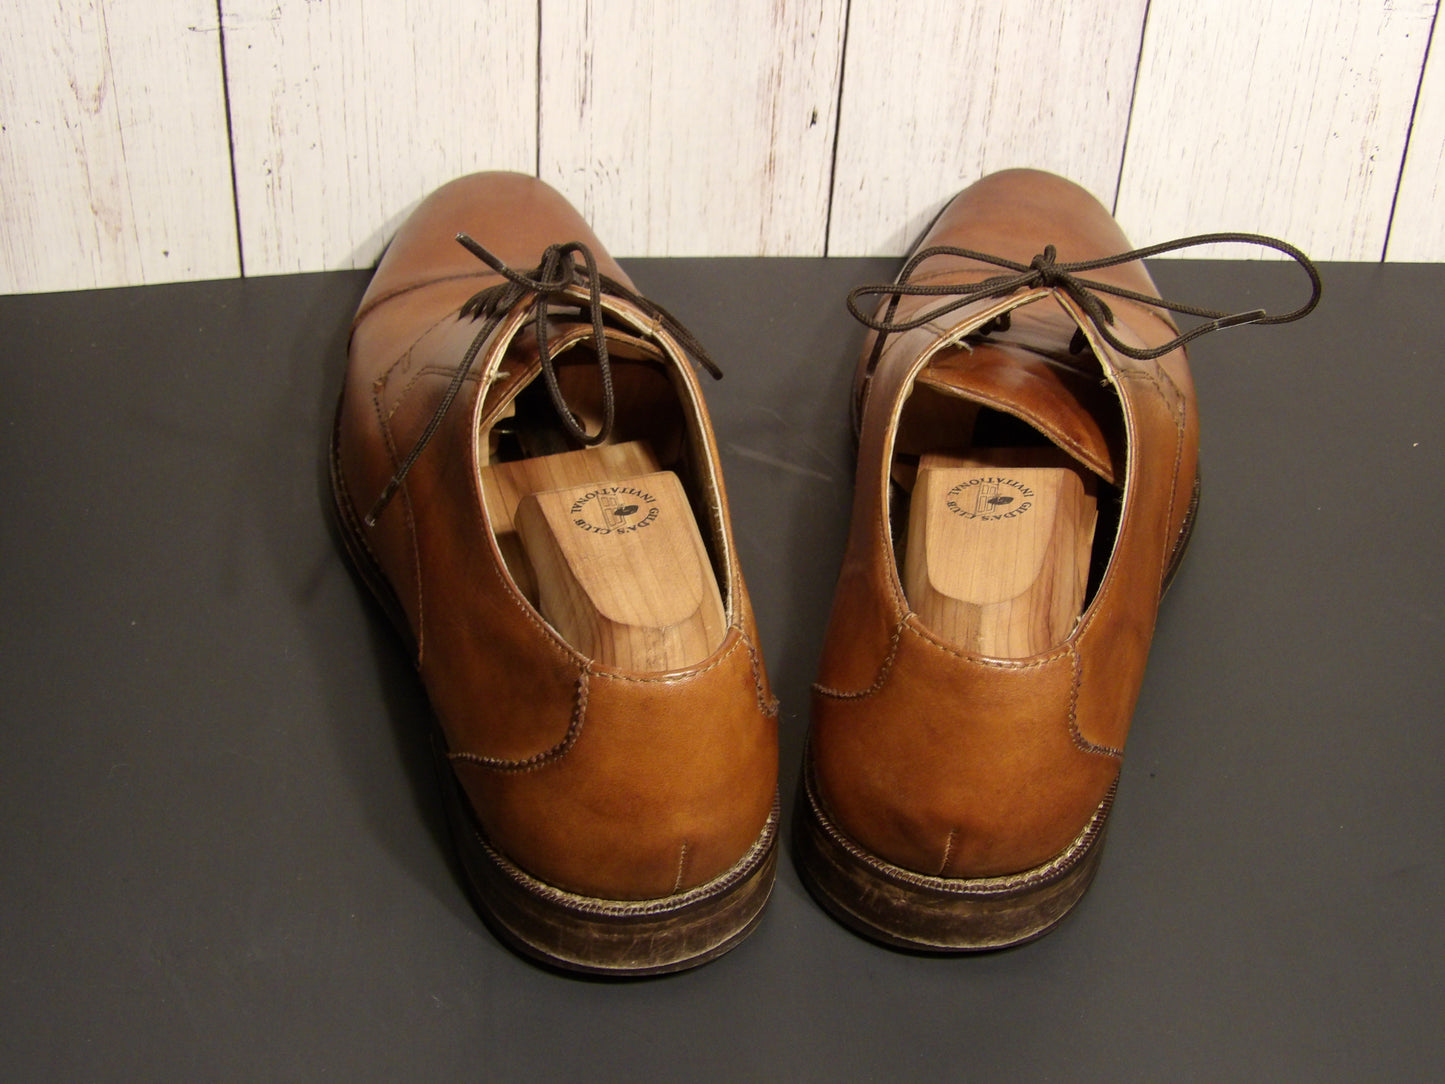 Leather shoes ( Florsheim ) Brown